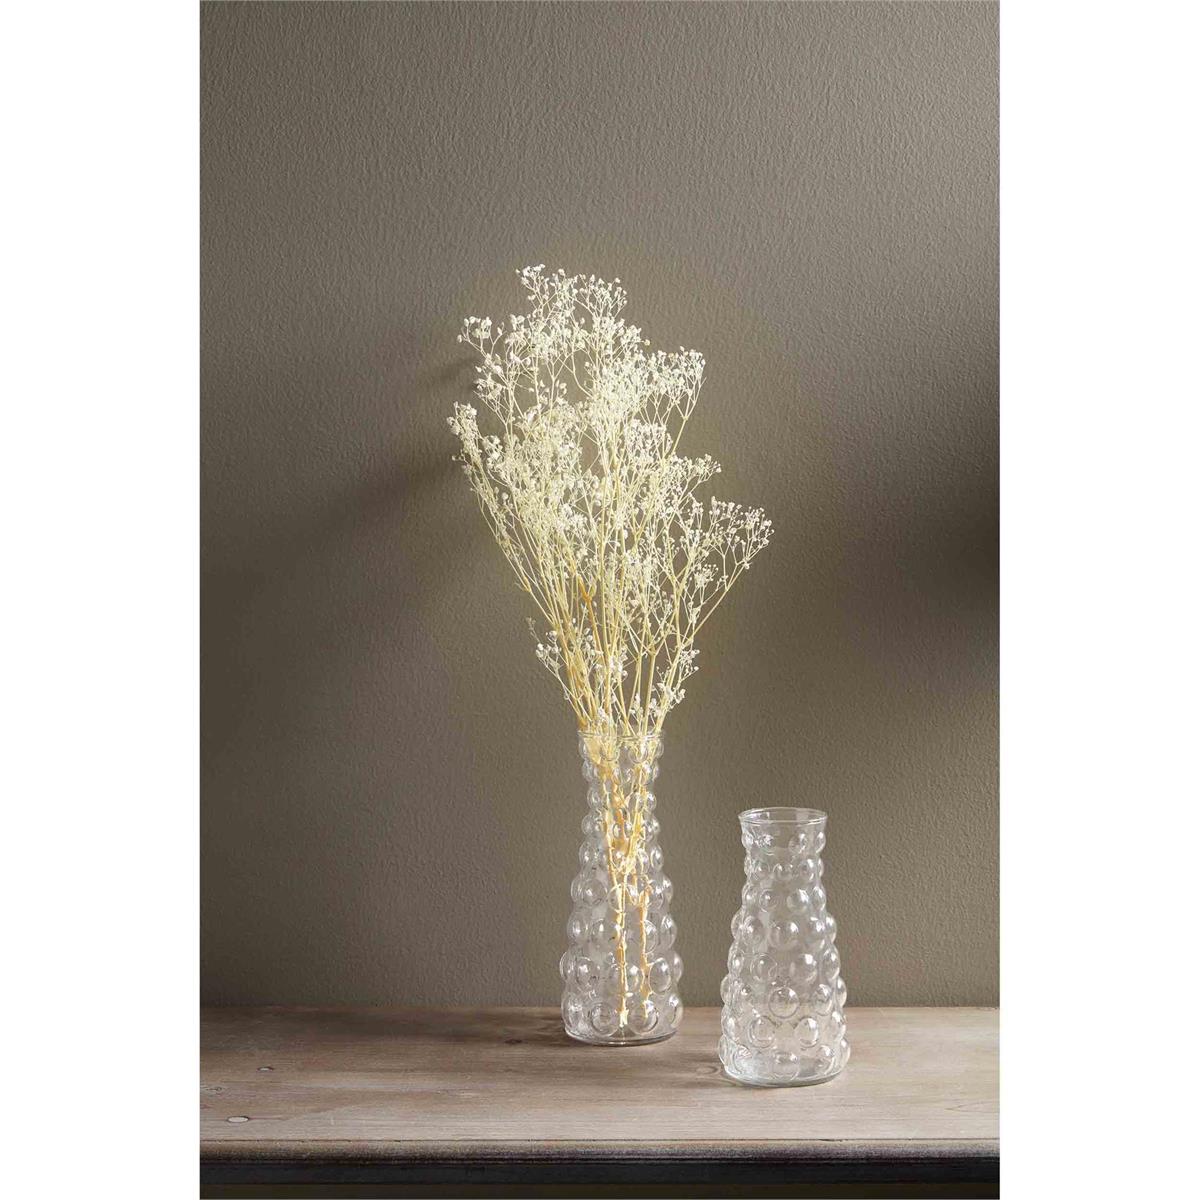 both sizes of hobnail glass vases displayed with dried flowers in the large against a taupe background